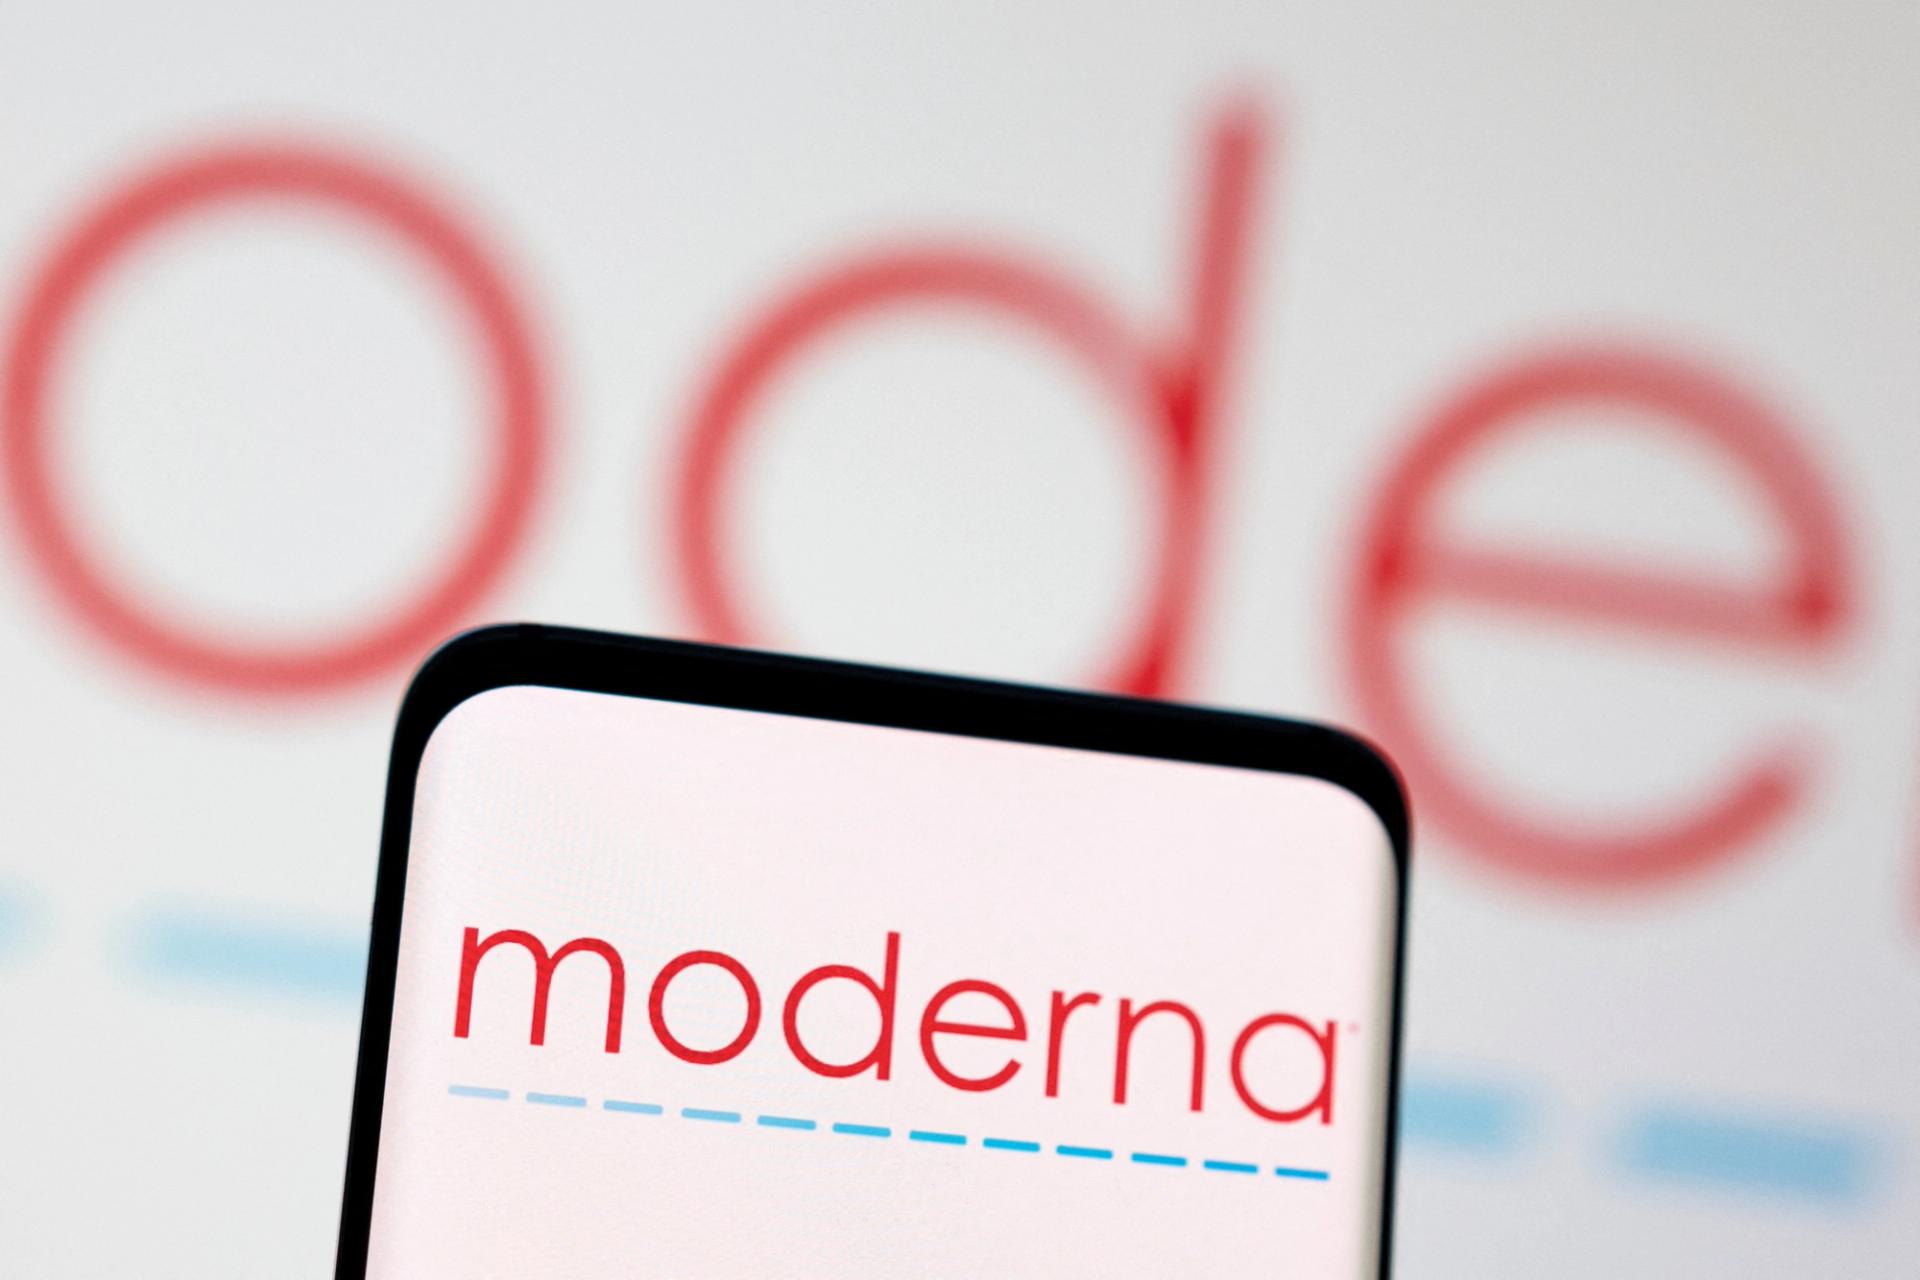 The Moderna logo is seen displayed in this illustration.